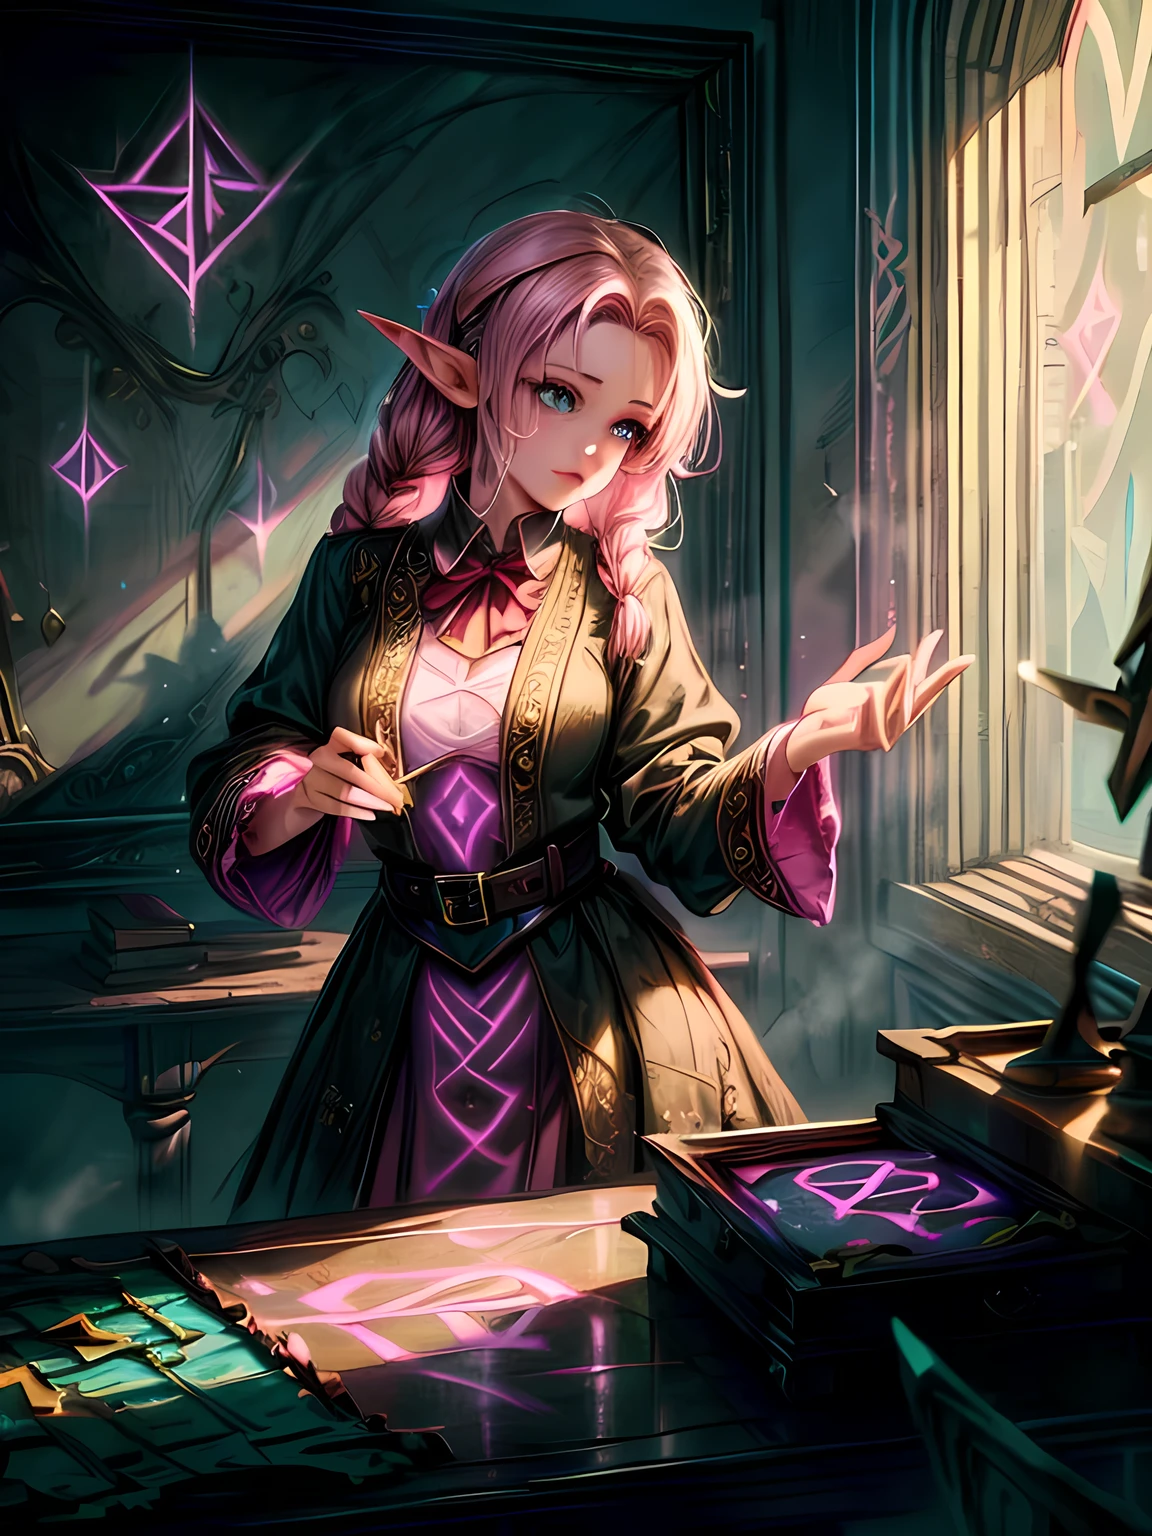 high details, best quality, 16k, [ultra detailed], masterpiece, best quality, (extremely detailed), ultra wide shot, photorealistic, a picture of an elf magical teacher (best details, Masterpiece, best quality: 1.5), teaching magical arts, manipulating magical pink magic runes in the air GlowingRunes_pink (best details, Masterpiece, best quality: 1.5) at fantasy classroom, a female elf, exquisite beauty (best details, Masterpiece, best quality: 1.5), ultra feminine (best details, Masterpiece, best quality: 1.5), full body (best details, Masterpiece, best quality: 1.5) golden hair, hair in a long braid, small pointed ears, dynamic eyes color, wearing a teachers robe, standing in the classroom (best details, Masterpiece, best quality: 1.5), fantasy class background, best realistic, best details, best quality, 16k, [ultra detailed], masterpiece, best quality, (extremely detailed), ultra wide shot, photorealism, room is lit with bright light, depth of field,